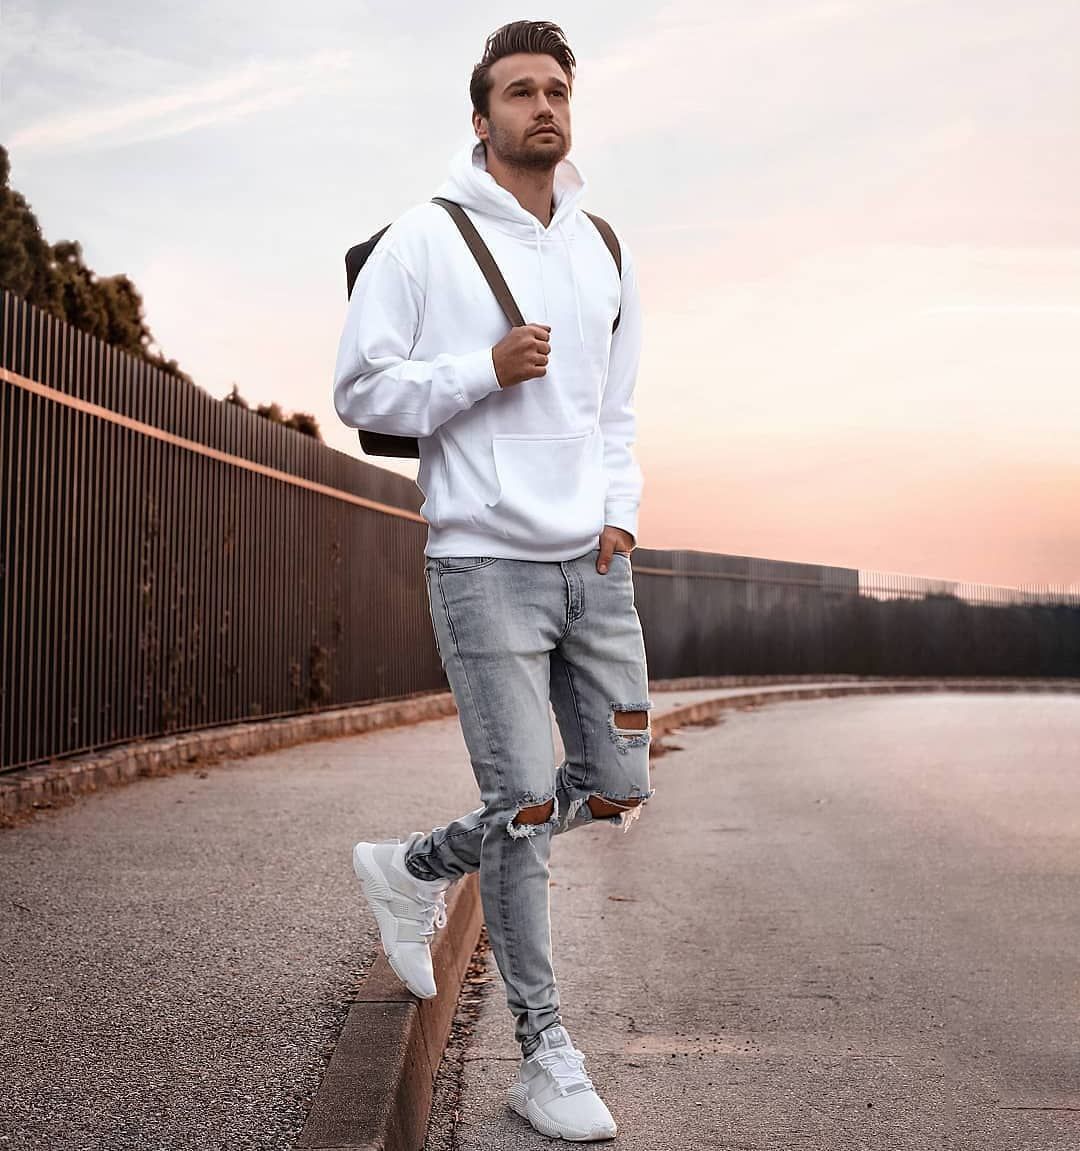 Love the white sweater and grey jeans   Thoughts? | Mens outfits, Jeans outfit men, Mens fashion casual outfits